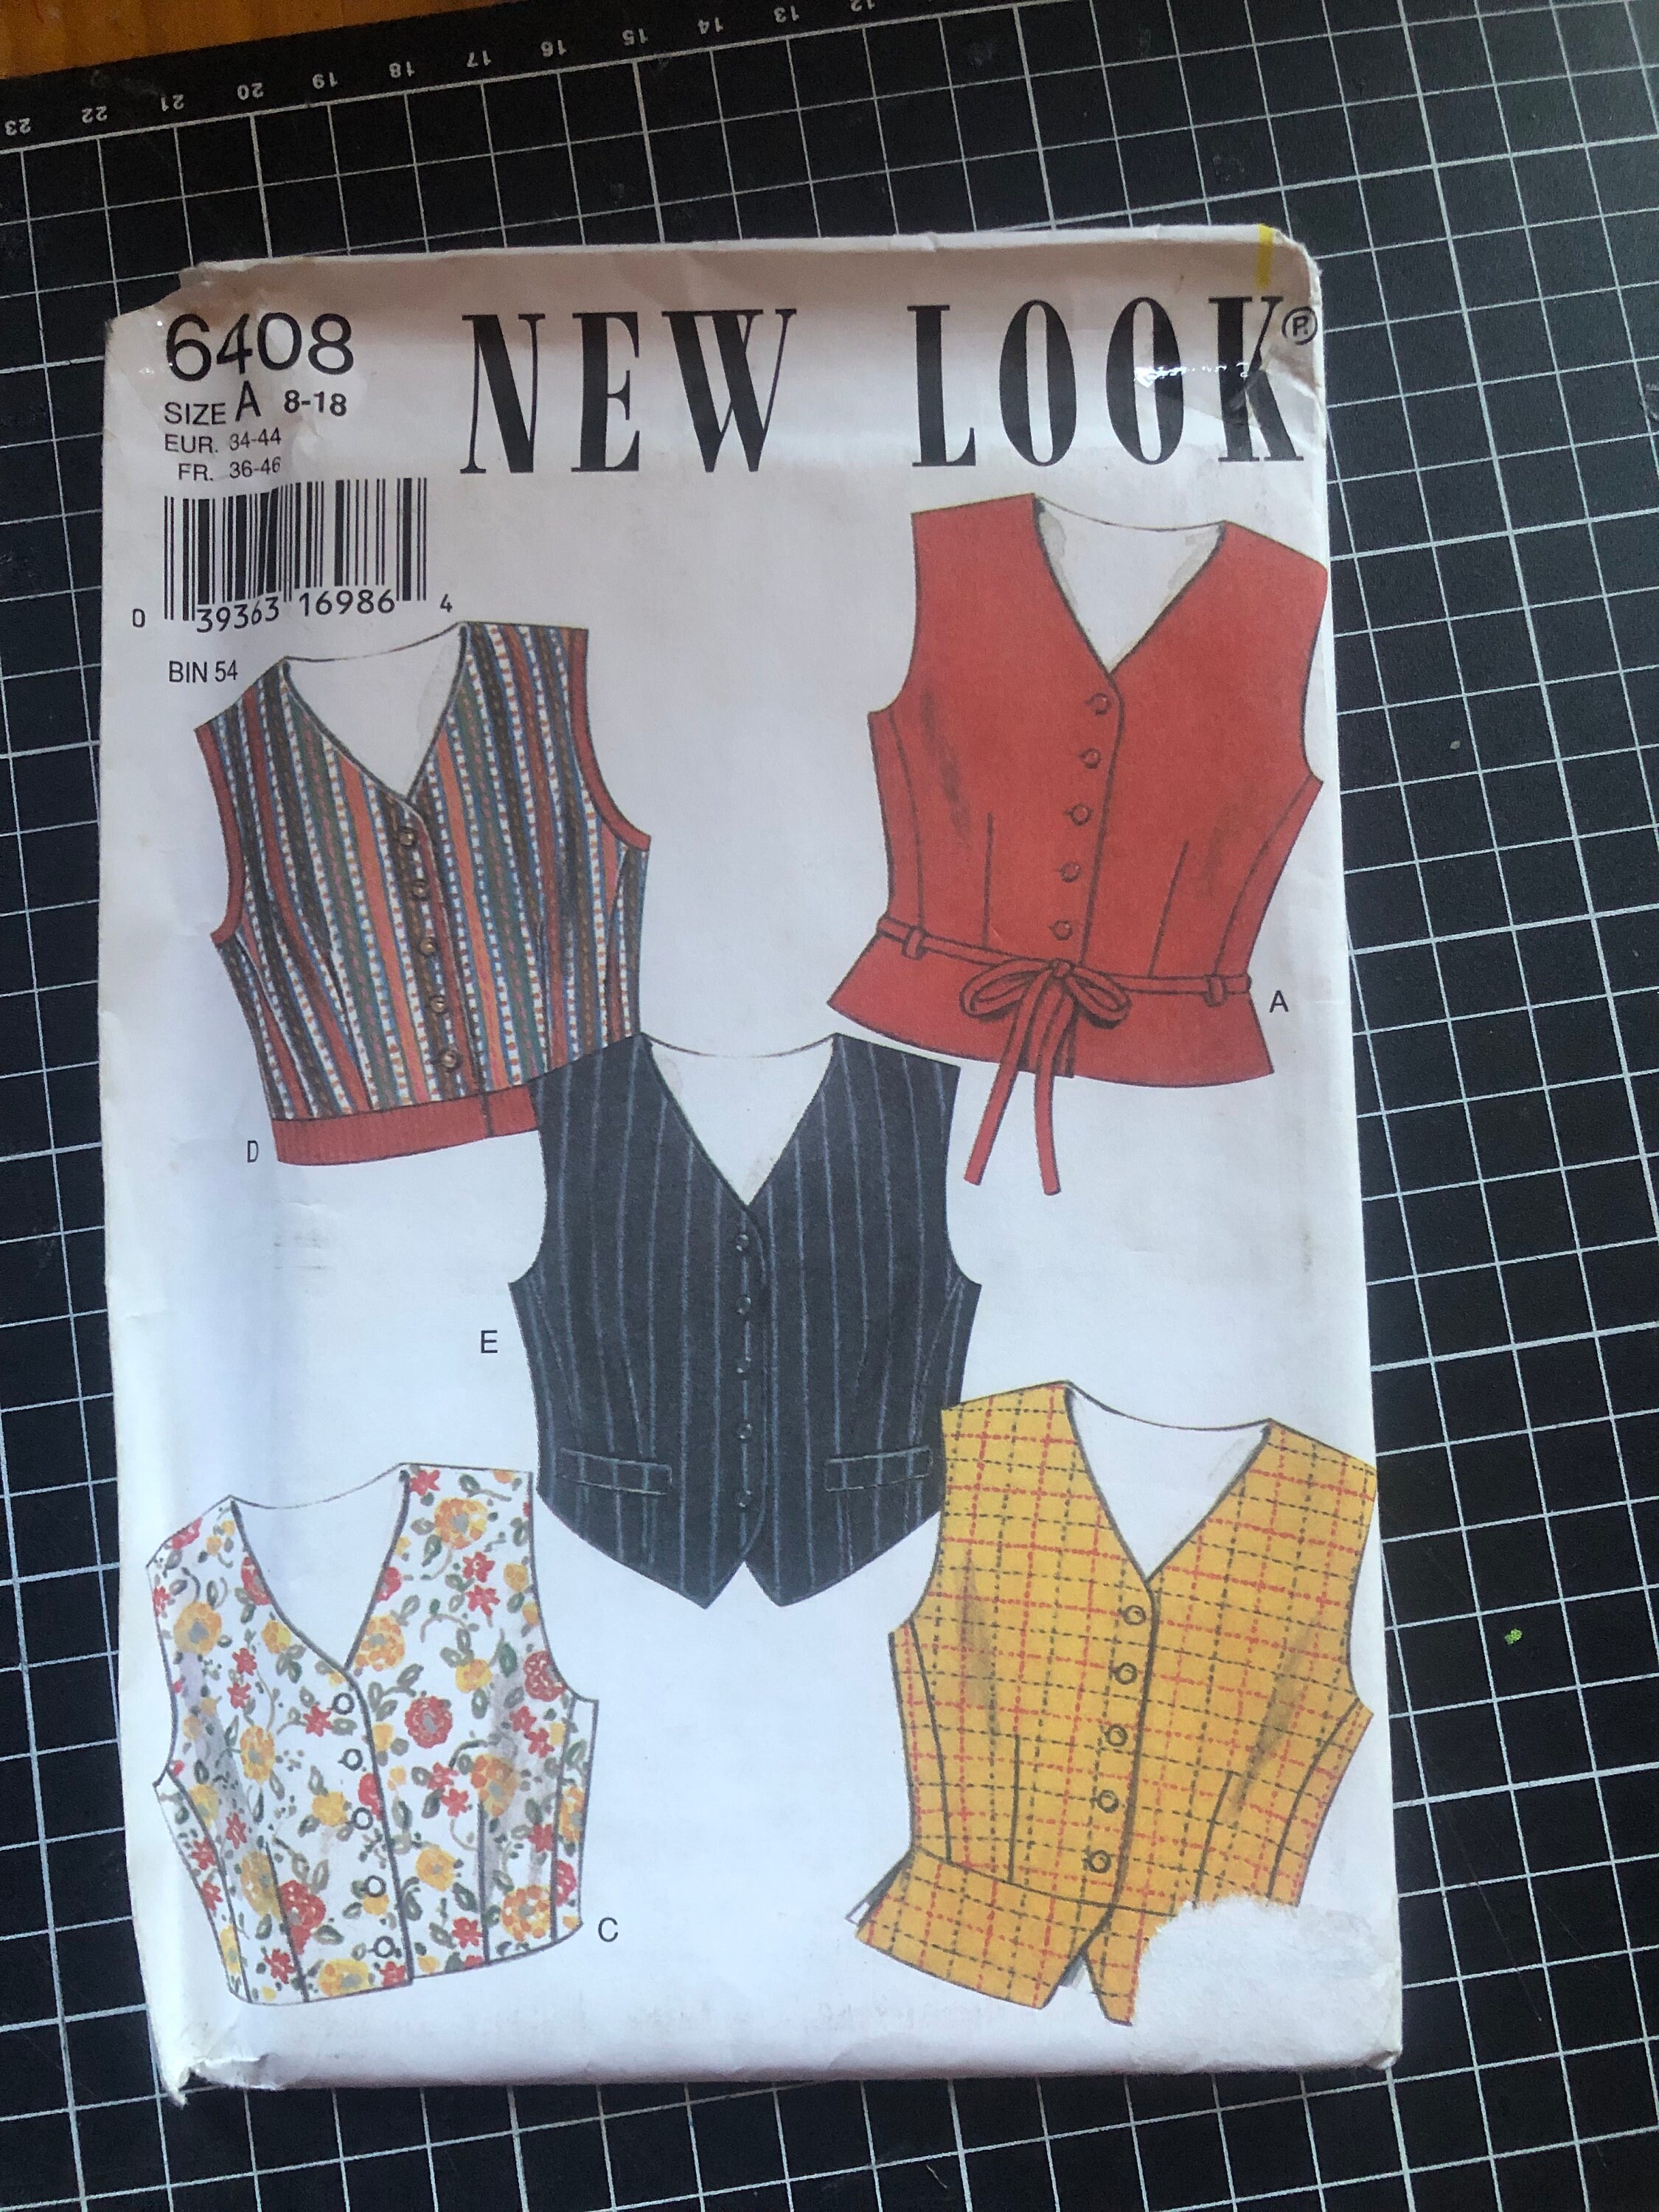 Sewing Pattern Paper Pack Pieces of Pattern Tissue & Instructions